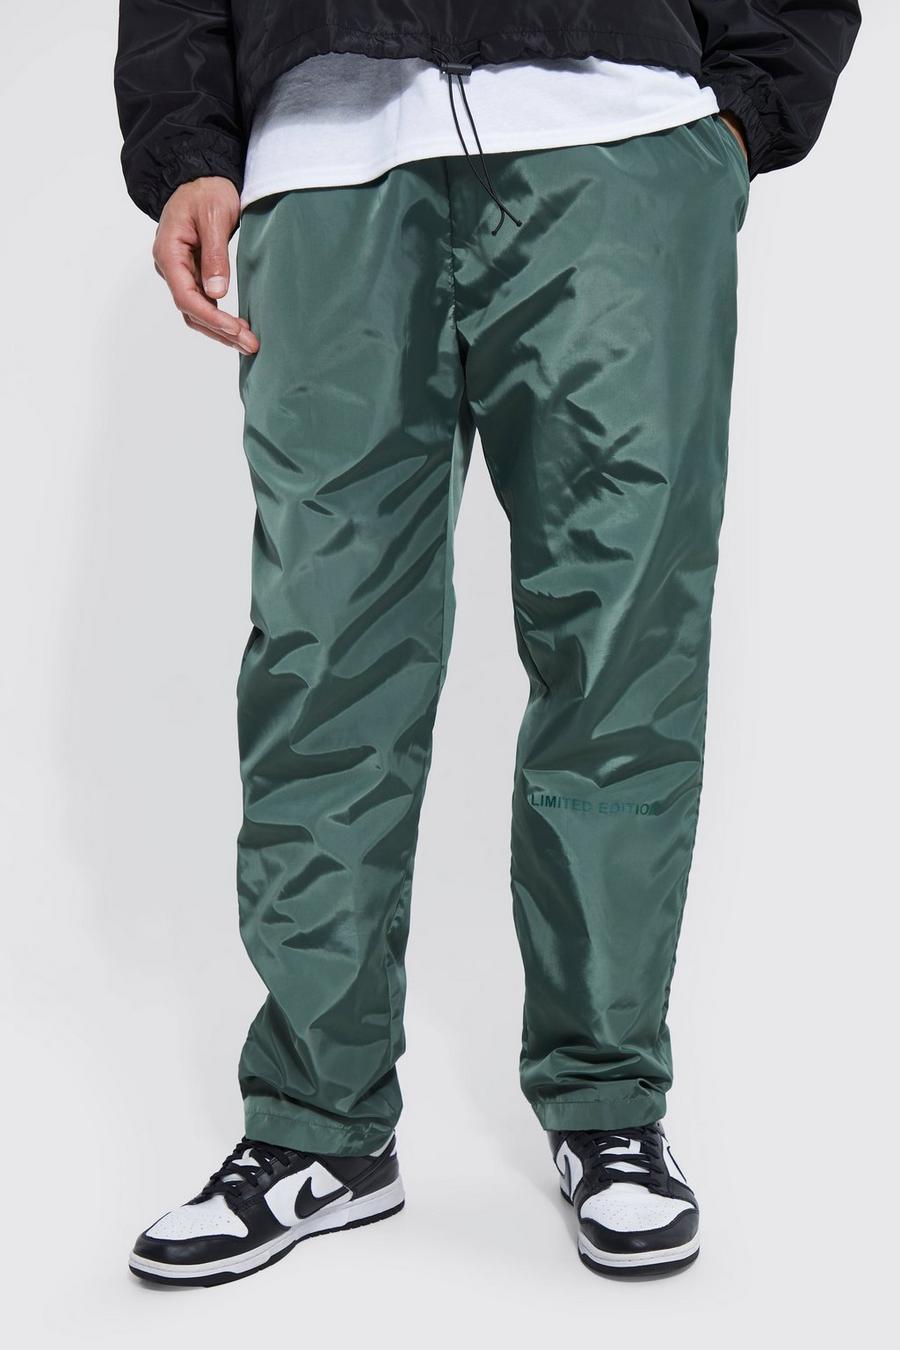 Forest Tall Elastic Waist Limited Edition Trouser  image number 1